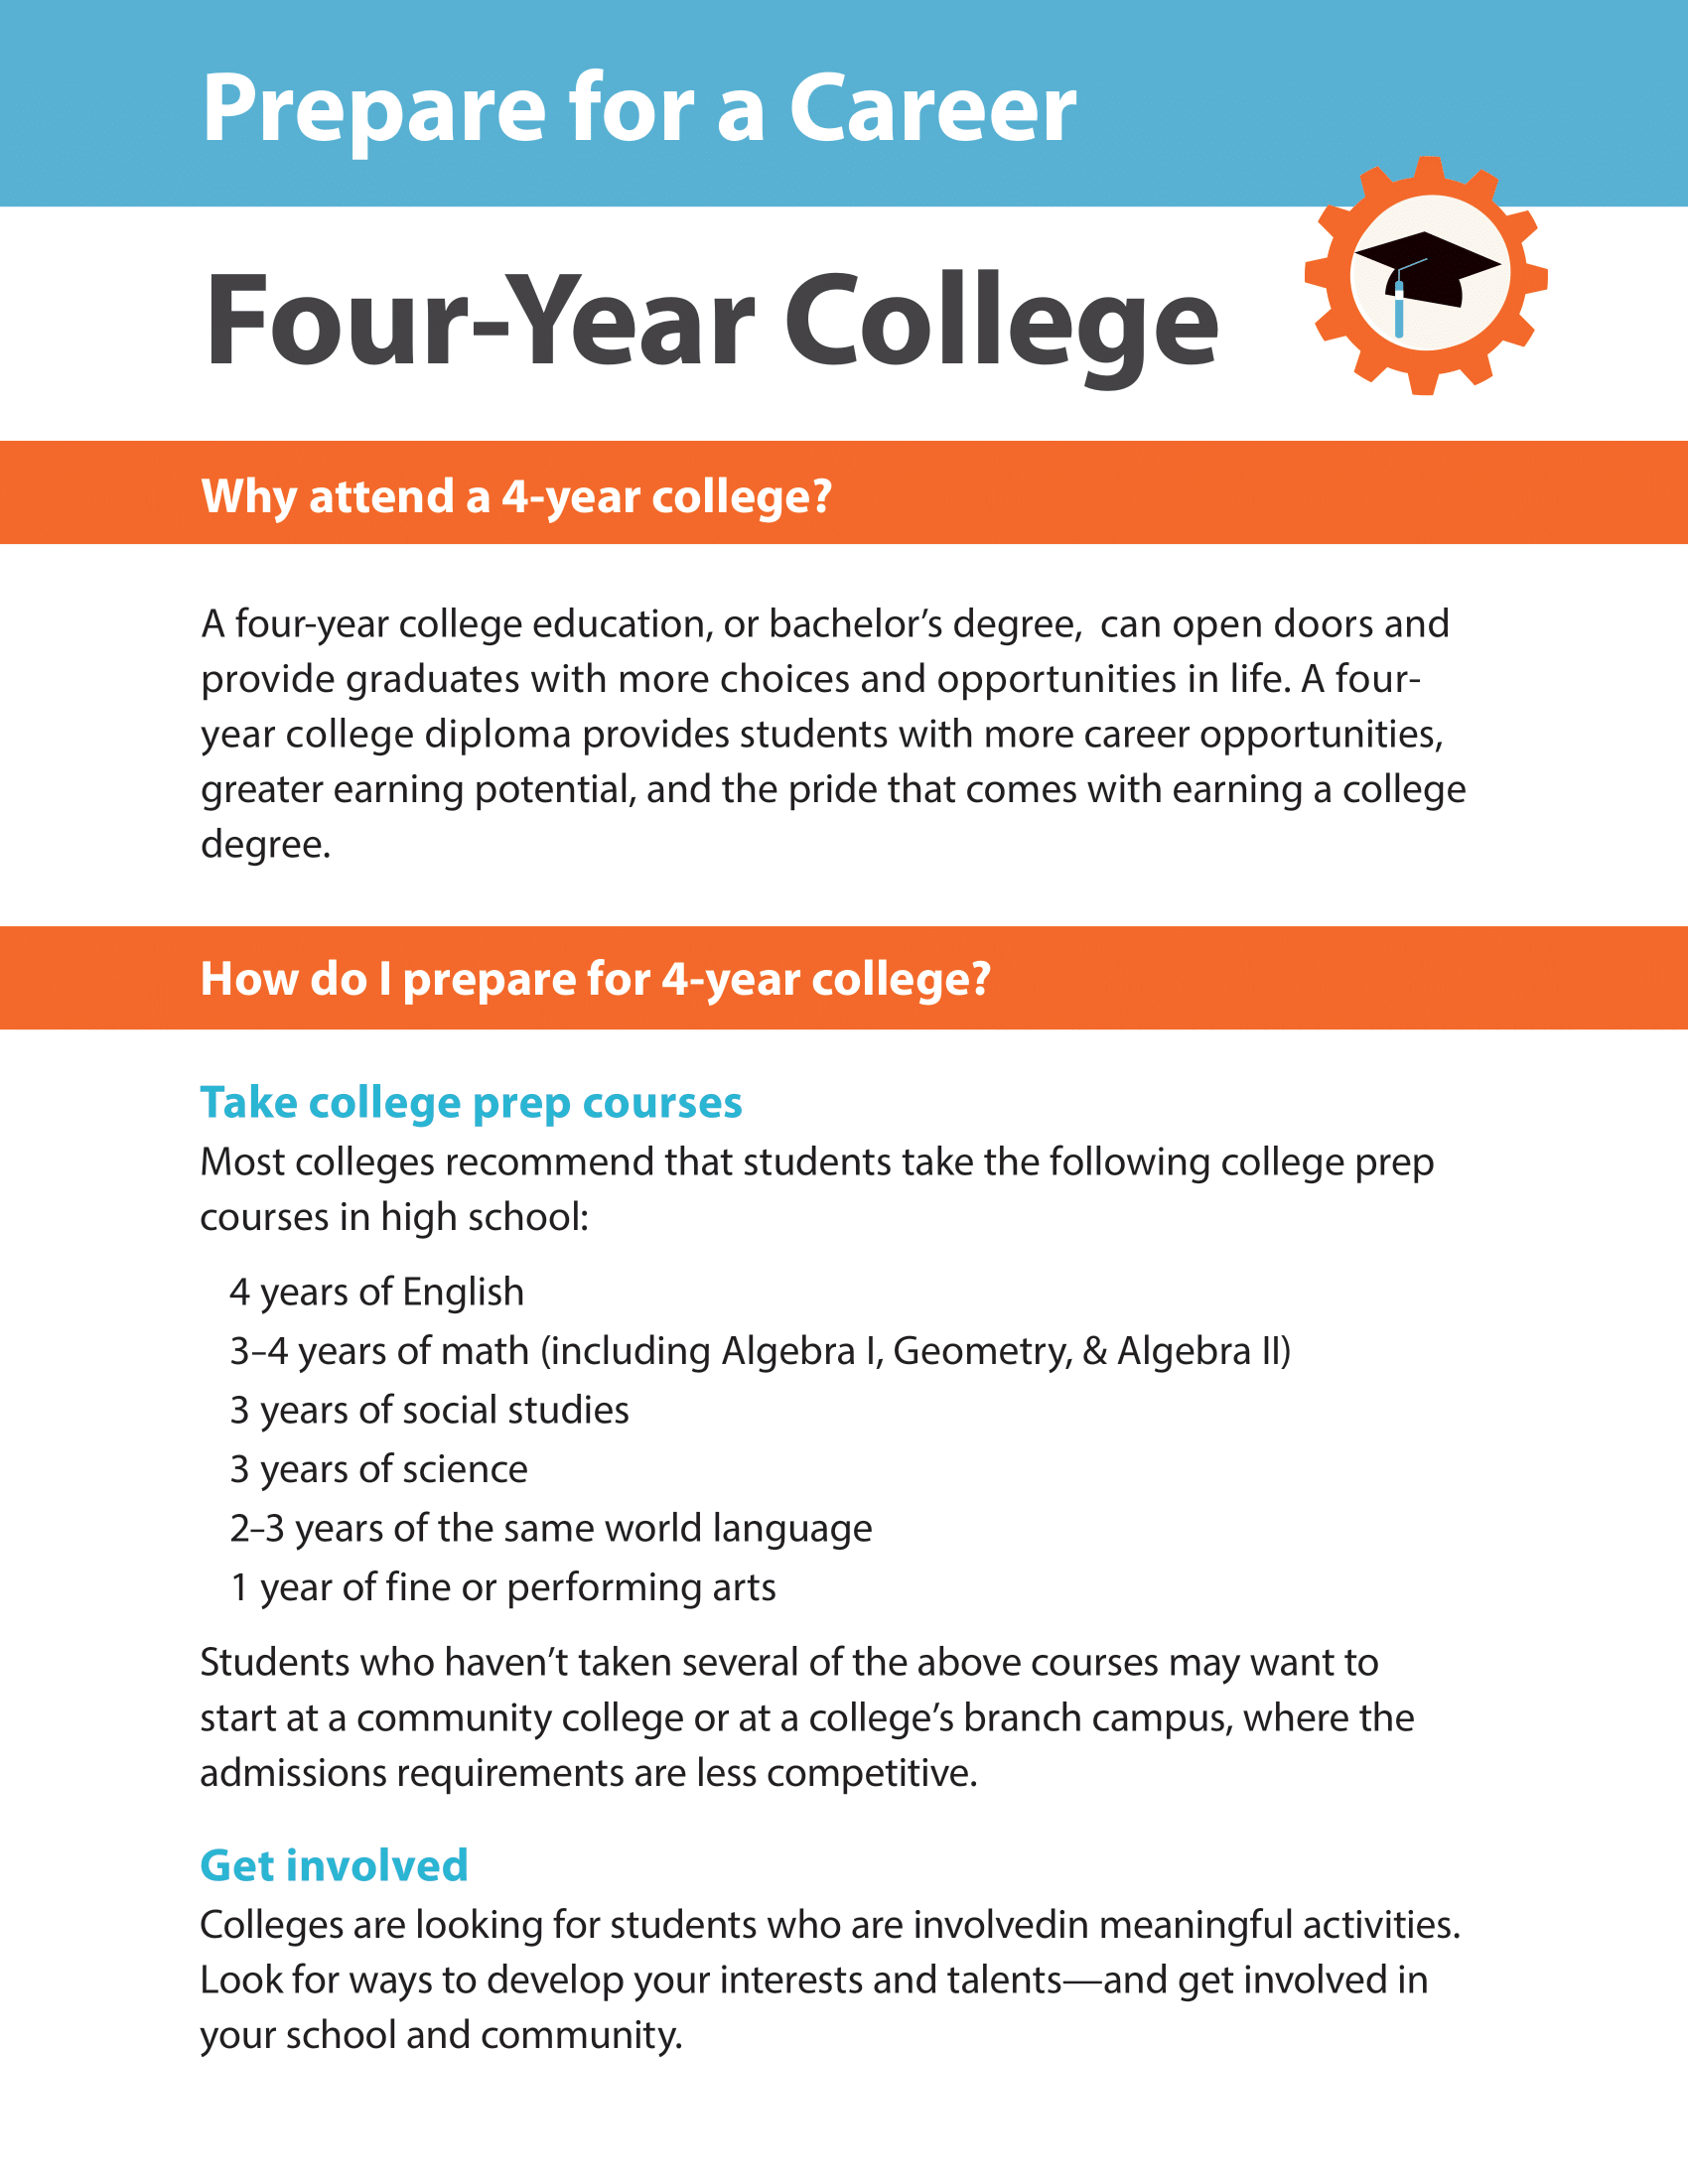 Prepare for a Career - Four-Year College